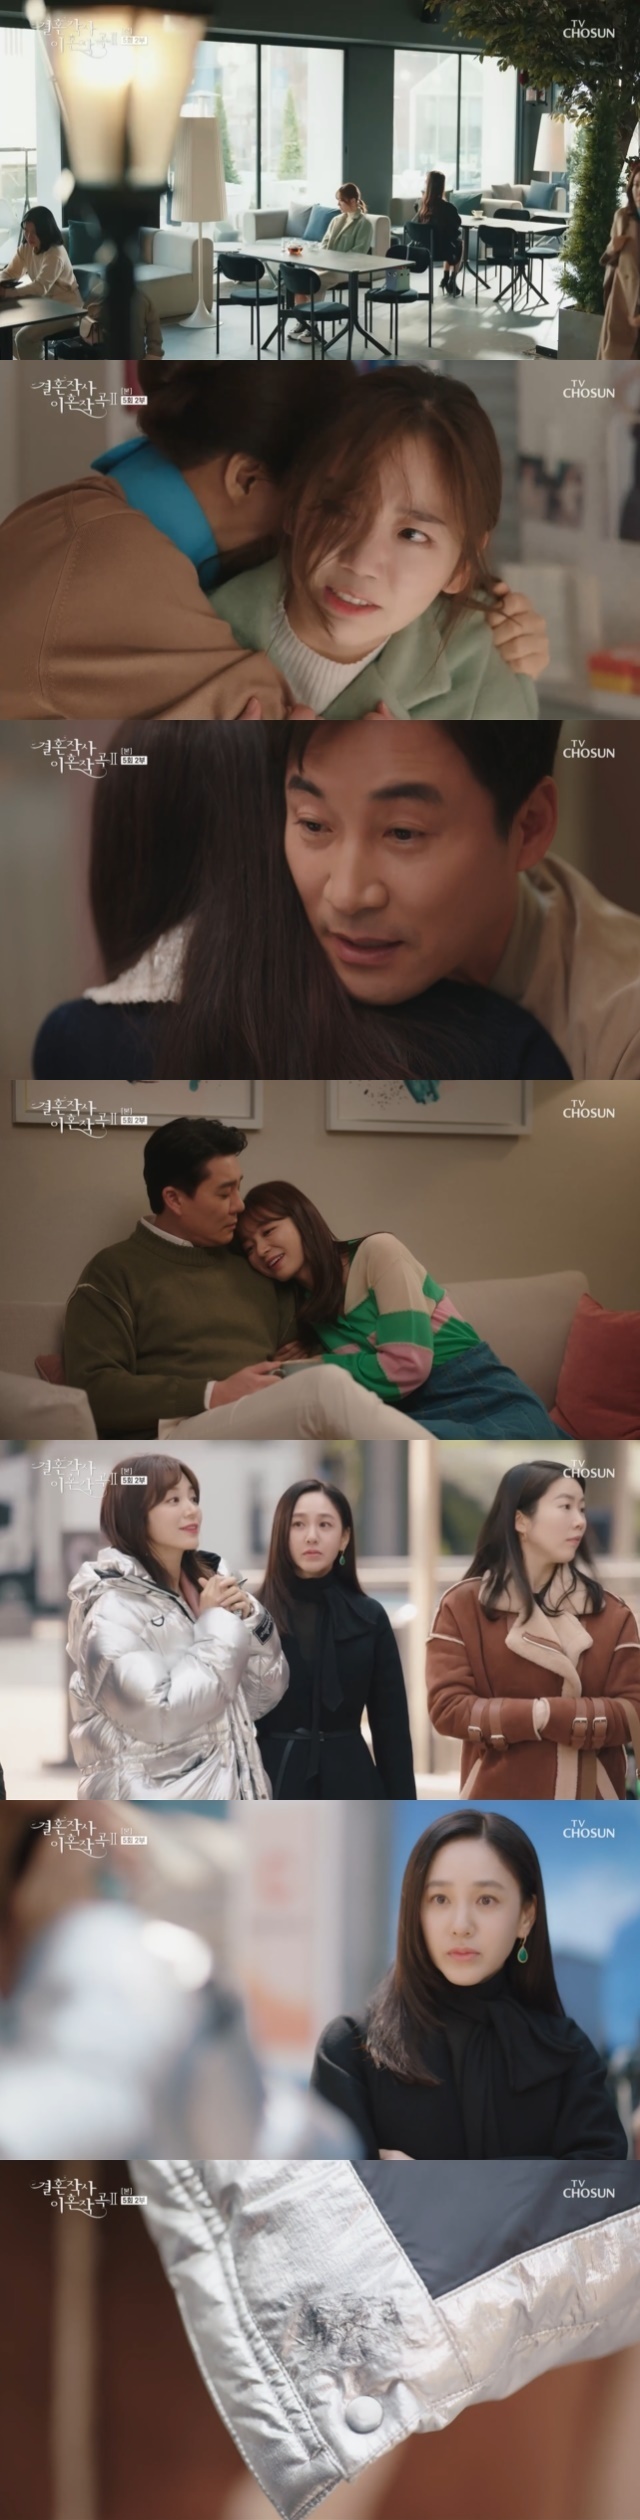 Park Joo-Mi is shocked by Song Ji-in, who says Lee Tae-gons padding is a gift from the man Friend.In the fifth episode of TV Chosun Saturday Drama Divorce Composition 2 of Marriage Writing (Im Sung-han), directed by Yoo Jung-jun, Lee Seung-hoon), which was broadcast on June 26, Park Hyang-gi (Jeon Hye-won), who was shocked to know the Affair opponent of Father Park Hae-ryun (Jeon No-min), was portrayed.On this day, Judge Hyun (Sung Hoon) and song won (Lee Min-young) welcomed the farewell after their last date.Judge Hyun, however, presented a diamond ring directly to song won, and when he was having labor, he asked him to contact him, to share the moment of childbirth, and not to change his phone number.He made a new decision to go home alone and make a happy ending, leaving the fuss of being healthy until I meet again and not forgetting me until the end.I will wind once, so I can be forgiven and endured, said Bu Hye-ryong (for example, a woman) who remains at home at the same time.Kim dong-mi (played by Kim Bo-yeon) cosplayed a good mother-in-law in front of Park Joo-Mi, but was jealous of the affection of Shin Yu-shin (played by Lee Tae-gon) and Safi-young.Kim dong-mi listened to the laughter of Safi Young and Shin Yusin outside the room and gave a meaningful warning that he would smile with sharp eyes.This is (Jeon Soo-kyung) agreed to a promise with Nam Ga-bin (Lim Hye-young), but Nam Ga-bins fan Park Hyang-gi was first at this position after being contacted by Friend.Park Hyang-gi, who did not know anything and received autographs from Nam Gabin, noticed a suspicious feeling when he saw this is and Nam Gabin together.Park Hyang-gi then settled on the table behind the two and said, How did it start?We have completely broken our family. Through the conversation that started with the words, Nam Gabin guessed that he was the opponent of Father Park Hae-ryun.Park Hyang-gi stepped in between the two and held back his desire to blow a bite at Nam Gabin.On the other hand, This is responded to Nam Gabin with a certain level of remorse: I broke up with my boyfriend who had been dating for nearly four years and had a great aftereffect; I was attracted to the warm and human side after being tortured by a bad man.It was a difficult decision to think about it and it was not easy. I want too much.I do not want to be bad at it, but I do not want to be bad at it. Instead of scolding Nam Ga-bin on the spot, Park Hyang-gi found out the address of Nam Ga-bins house through Friend.However, Park Hyang-gi was discovered first by Park Hae-ryun, and Park Hae-ryun forced Park Hyang-gi in the elevator and shouted, No matter how angry you are.I want to die, if its not just my mother, he said, who was forced into Parks car.Park Hae-ryun told Park Hyang-gi, You also know who you meet next, and if you live in a house for decades, not a year, you will lose your excitement.Just like you dont thump at your mother, Father. Just a grateful family. Living with family, dating, first guilt, then this.If I was a good mind, I would have finished it. Even if I tried to restrain myself by reason, Father failed because of lack of training.Park Hyang-gi, who had been listening to this persecution all along, came home and ran away.Park Hyang-gi broke everything in the room and said, What about evergreen water and beautify Affair like a professor in such language play? Its dirty. Chunryun?Who says you cant cut a thousand wheels. Youre so easy to let go. You left us, you were lost by a young, pretty woman.I dragged her out like a dog because I would touch the girl I love, and she was like a dog because she was so precious that she was not blood for less than a year. But Park Hae-ryun was hurt by the word Ji-daughter. This is hit two of these Park Hye-ryuns cheeks first.She said, Park Hae-ryun is really crazy. What is good for you? She expressed her desire to forgive him again. Park Hae-ryun was bitterly kicked out of the house.This is told Park Hyang-gi, My mother has been empty for a while, and I can not drink a sip of water in front of me.Half a cup of water, half a cup of water. No one has a life.I live with your father and live with our three families more than I am sick, and I am a thousand times more grateful and happy. This is was no longer a desire to live happily with his son and daughter without any disagreement with Park Hae-ryun.Meanwhile, Shin Gi-rim (played by Roh Joo-hyun) was still hovering next to Kim dong-mi.Shin Ki-rim watched Kim Dong-mi sing a meaningful song I want to know you alone, I want to have you alone from the side.Park Hae-ryun told Nam Gabin, I left all of me and came to you. From the same womans point of view, I am a bad father, a bad husband.Its over. Its just you to me now. Nam Ga-bin hugged Park Hae-ryun and comforted him, saying, Im the same.As time passed, Buhye-ryong, who is still having a hard time because Christmas is still not pregnant, accidentally met Seo Dong-ma (Boo-bae) again in the hair salon.Buhye-ryong remembered Seo Dong-ma, who had bought wine for himself in the past, and handed him a snow greeting first.